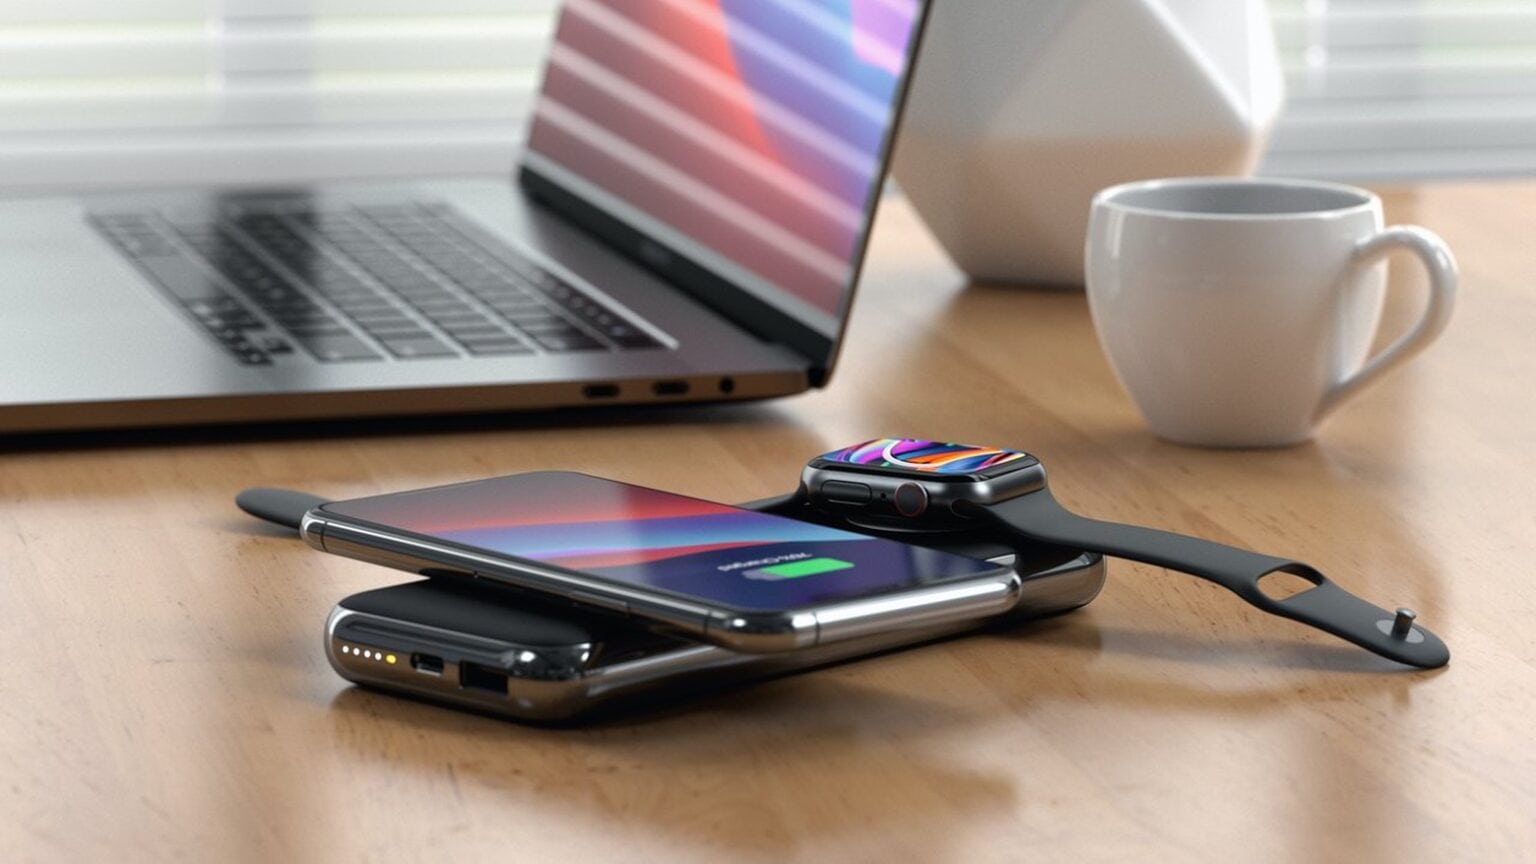 The Satechi Quatro Wireless Power Bank includes four charging methods.